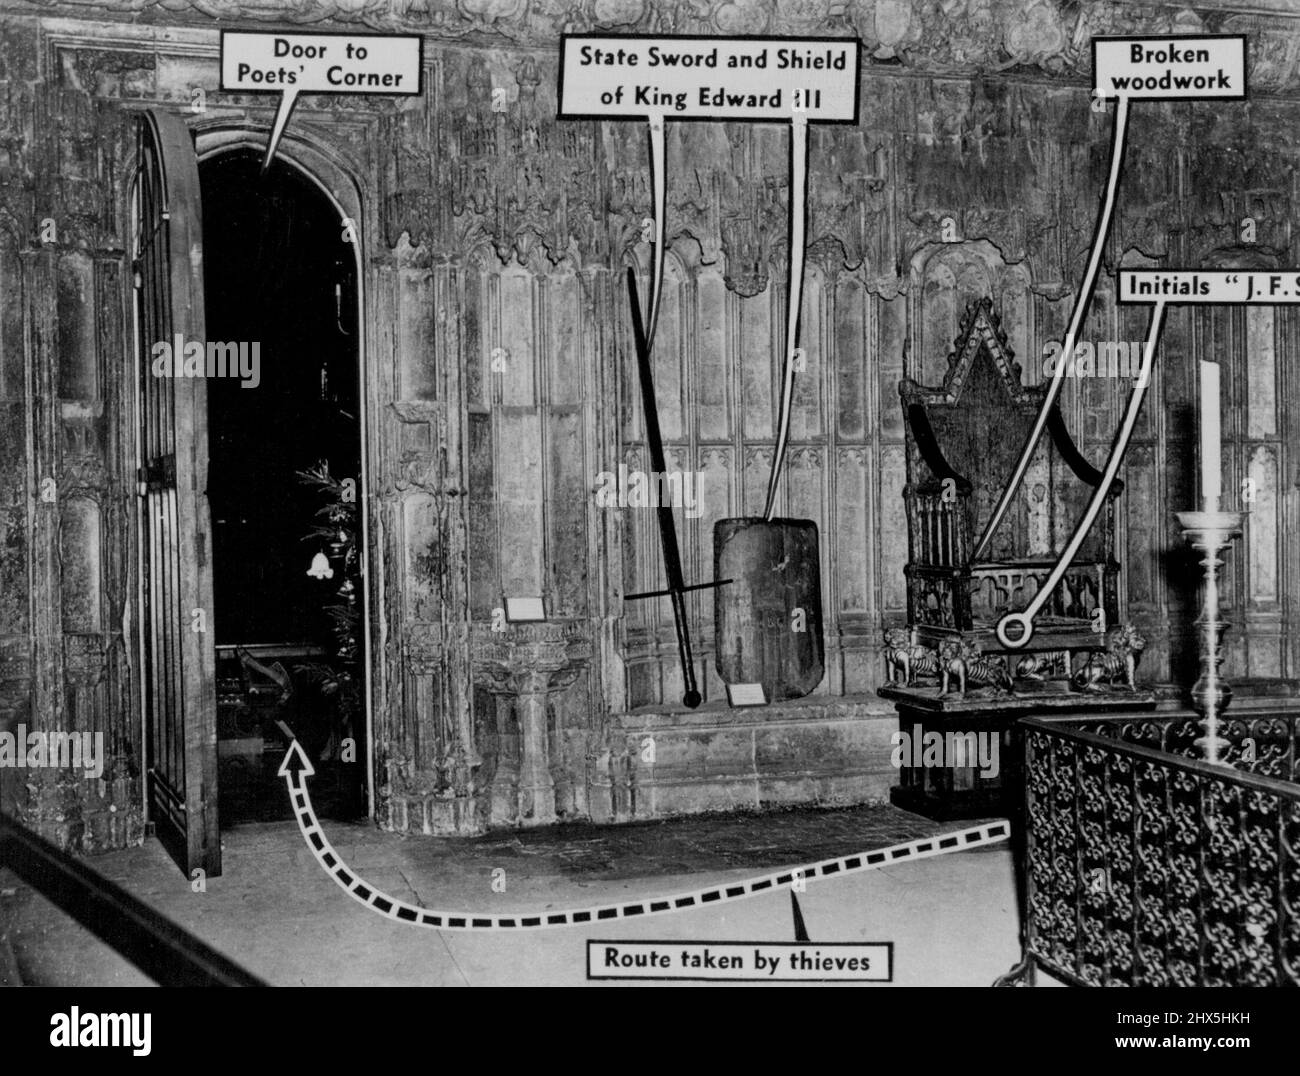 From Britain's Westminster Abbey -- A big nationwide search is going on to find the historic coronation stone which was stolen on Christmas morning from tinder the Coronation chair in London's Westminster Abbey, where it had rested for 650 years. Scottish nationalists are suspected. The stone was used for crowning Scottish kings for 400 years before 1296, when King Edward I brought it to London. The scene of the crime. The stone was stolen from the Coronation Chair(on right). Newly carved initials J.F.S. on the chair may be a clue. One suggestion is that the initials stand for Justice for Stock Photo